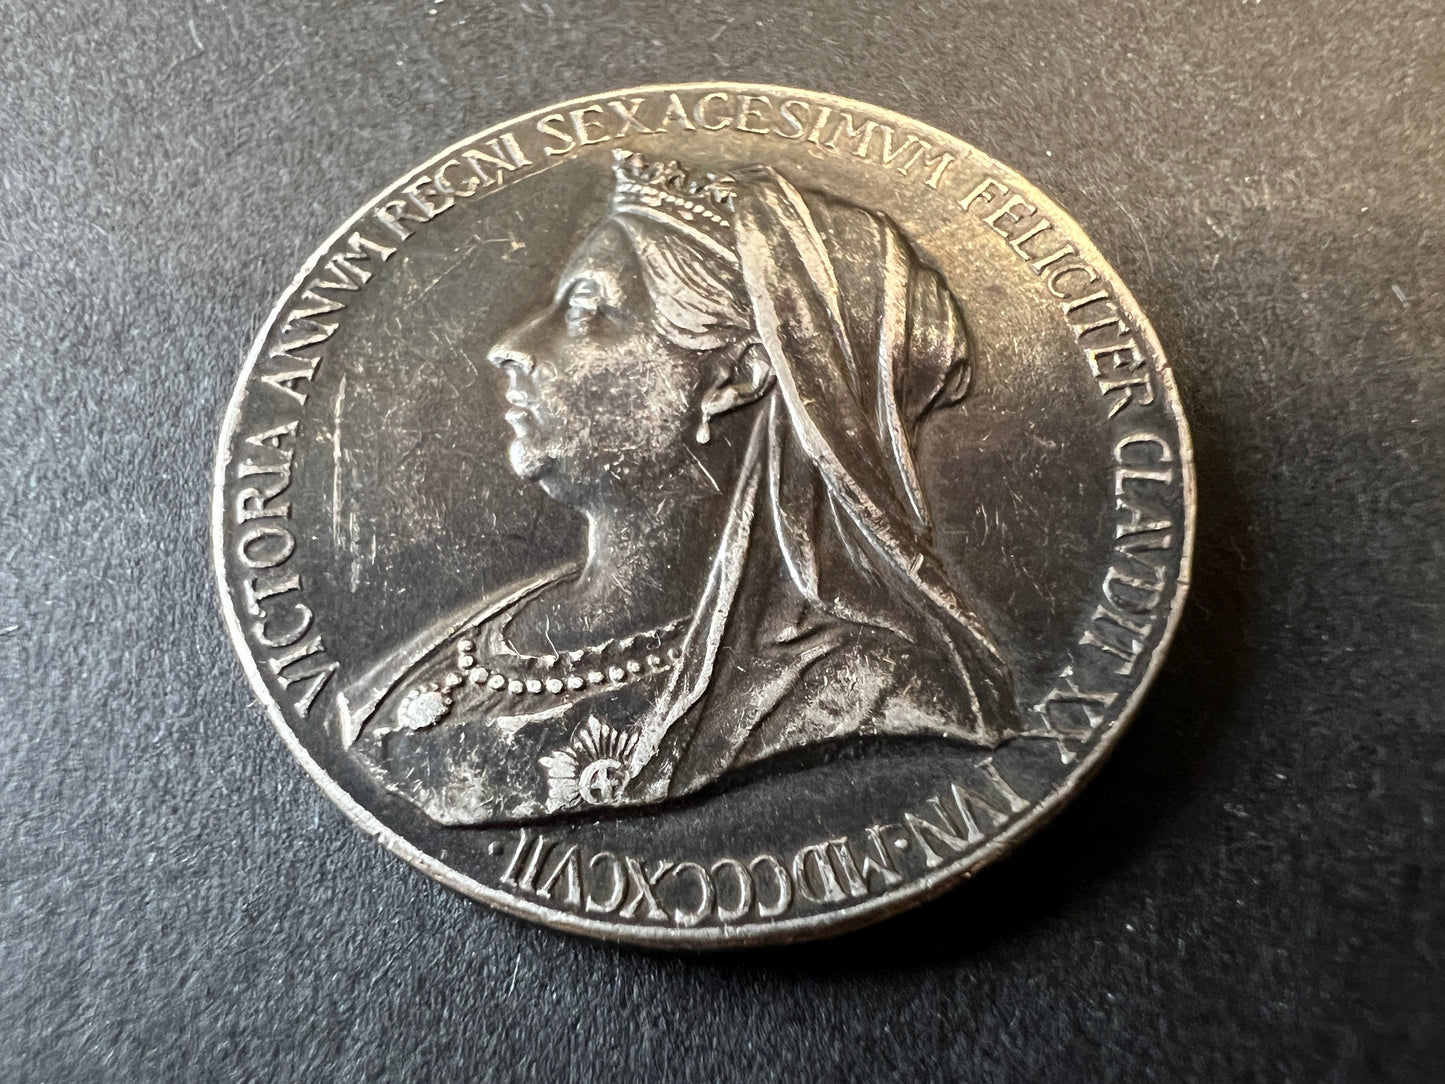 1897 Diamond Jubilee Queen Victoria medal - Young Victoria on one side, Old Victoria on the other